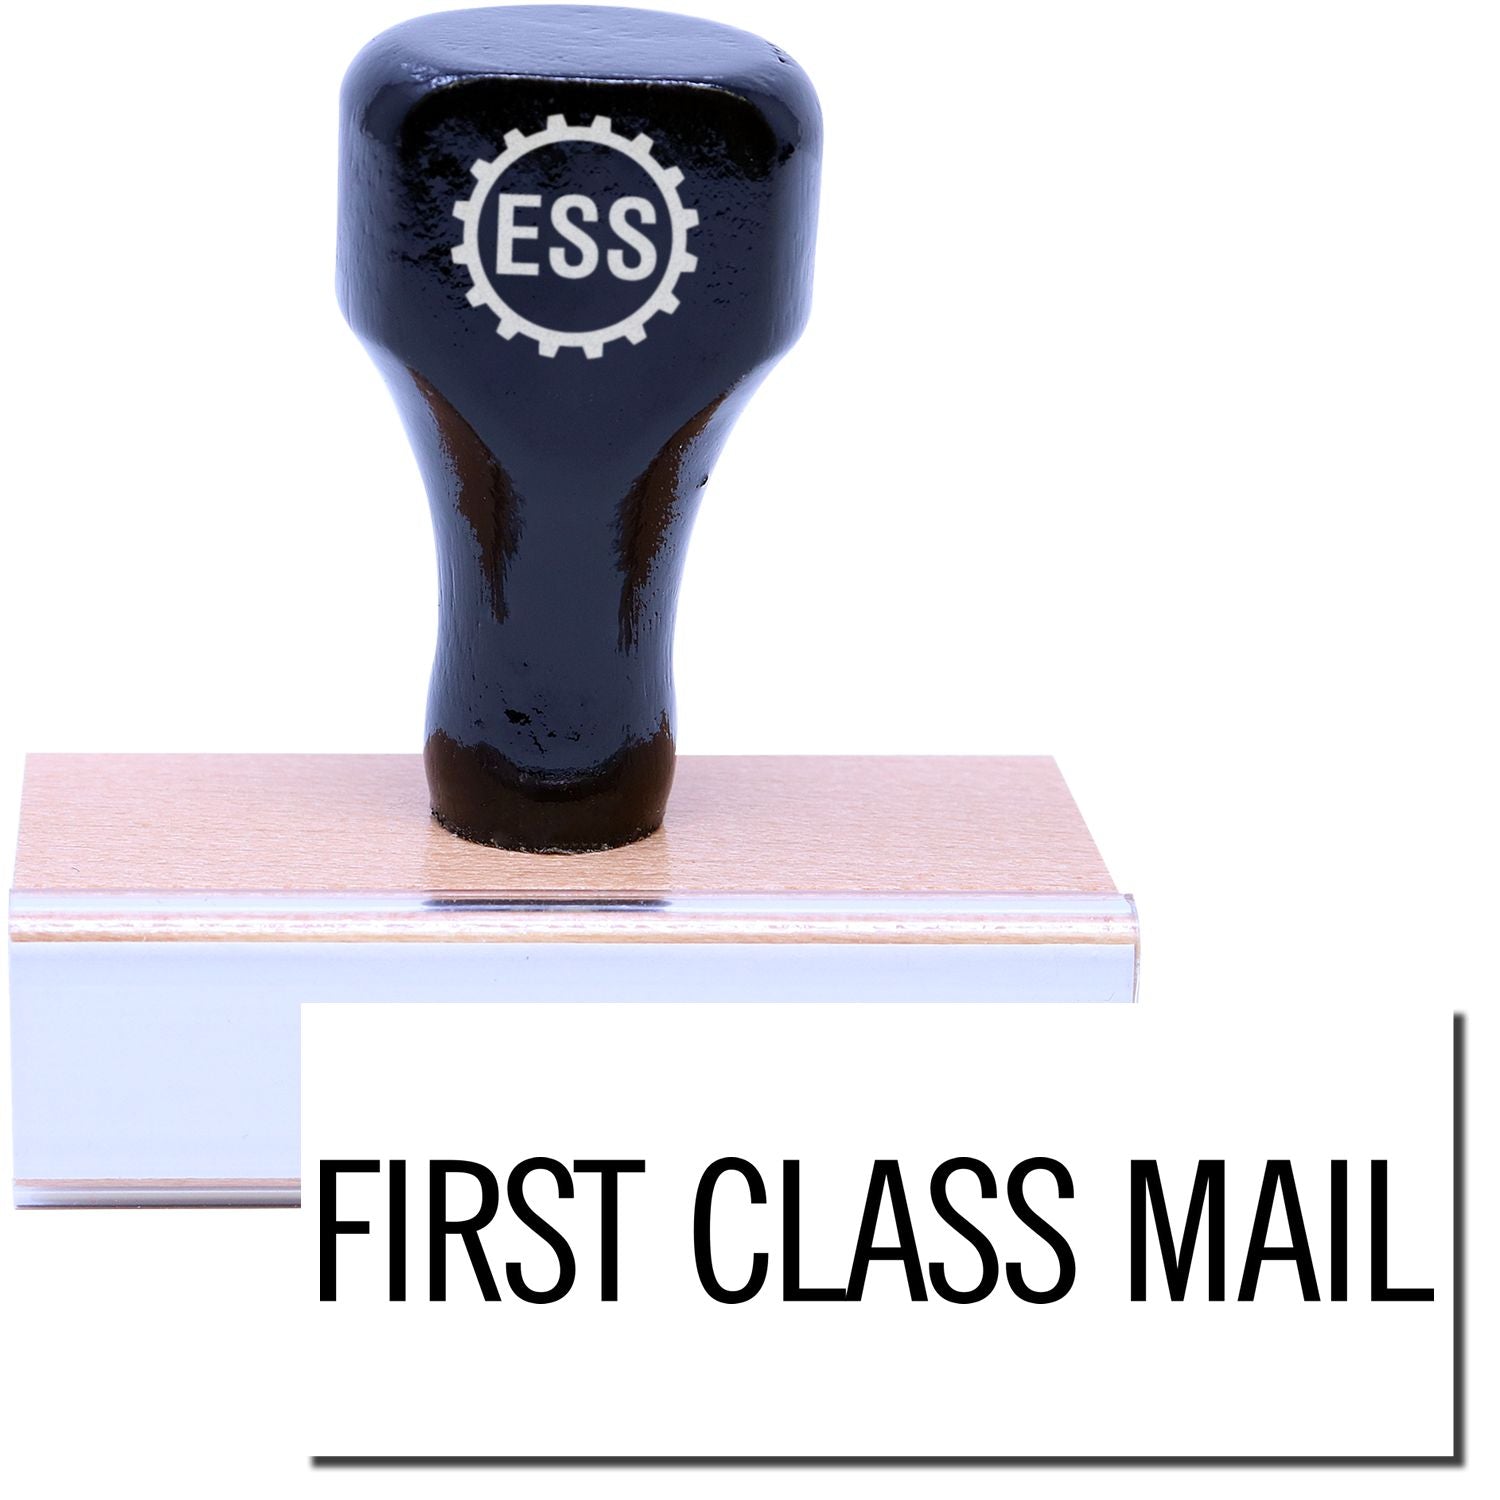 A stock office rubber stamp with a stamped image showing how the text "FIRST CLASS MAIL" in a narrow font is displayed after stamping.